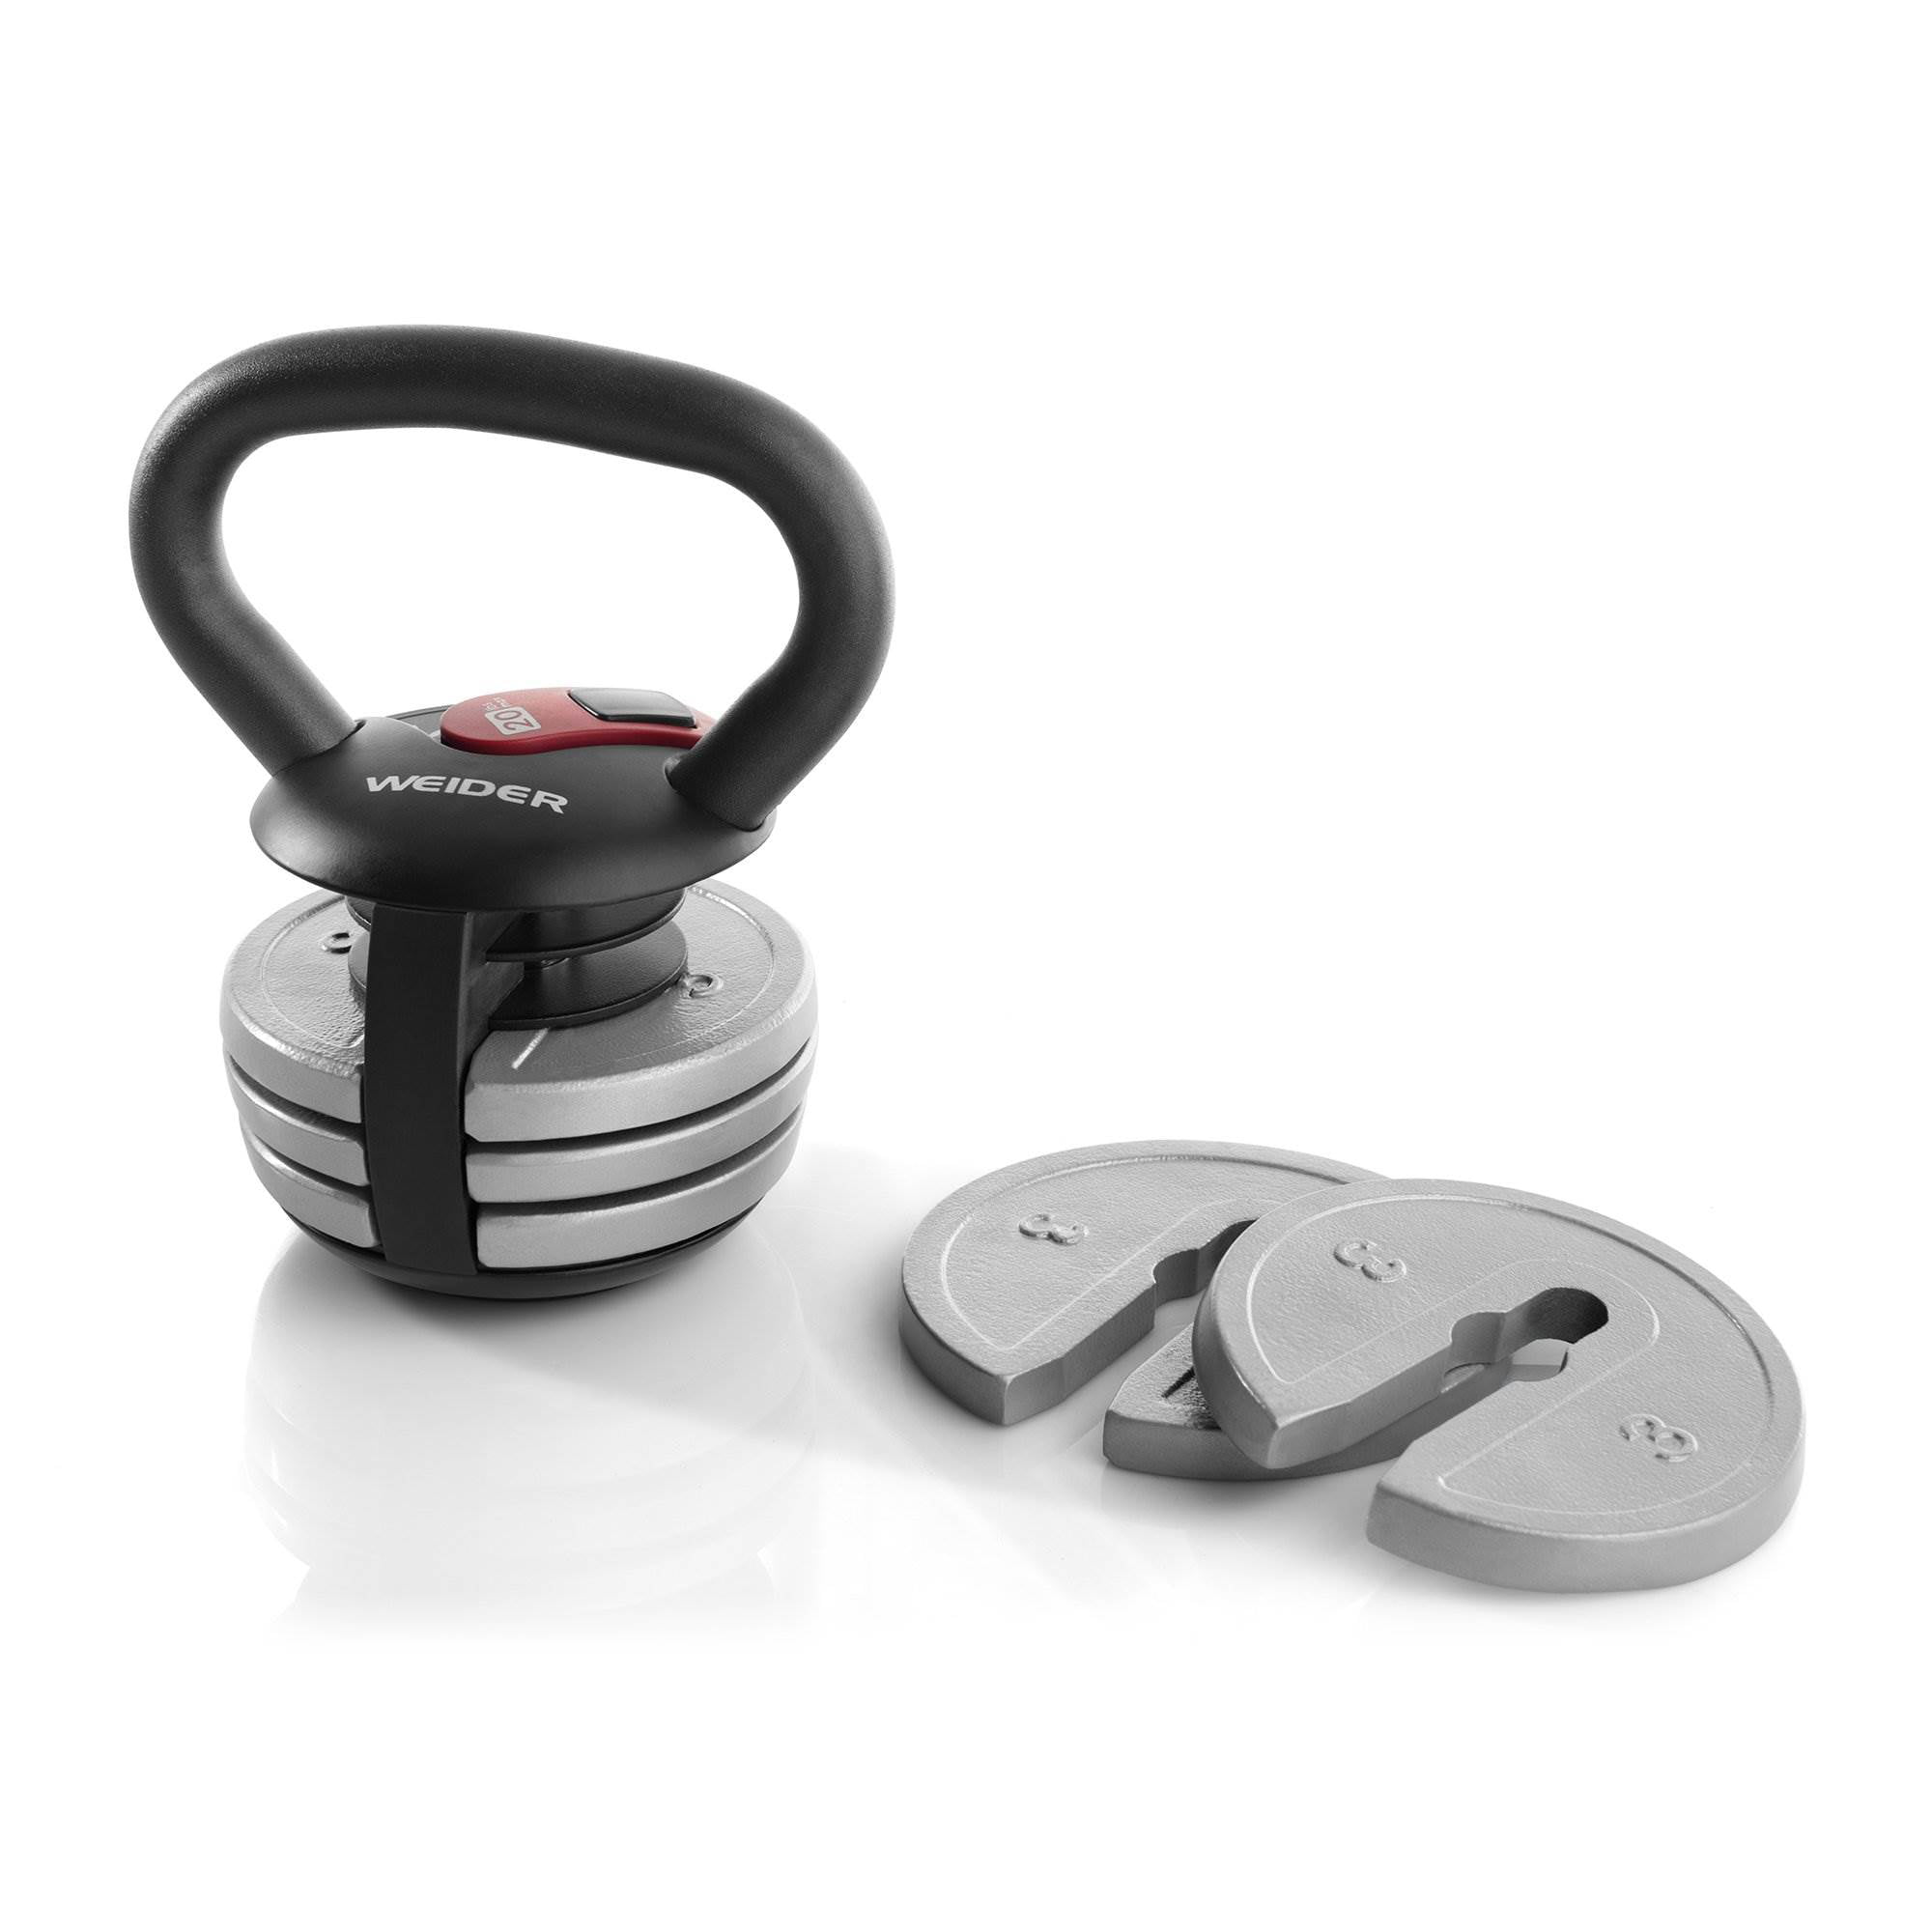 Simple Weider Kettlebell Workout with Comfort Workout Clothes